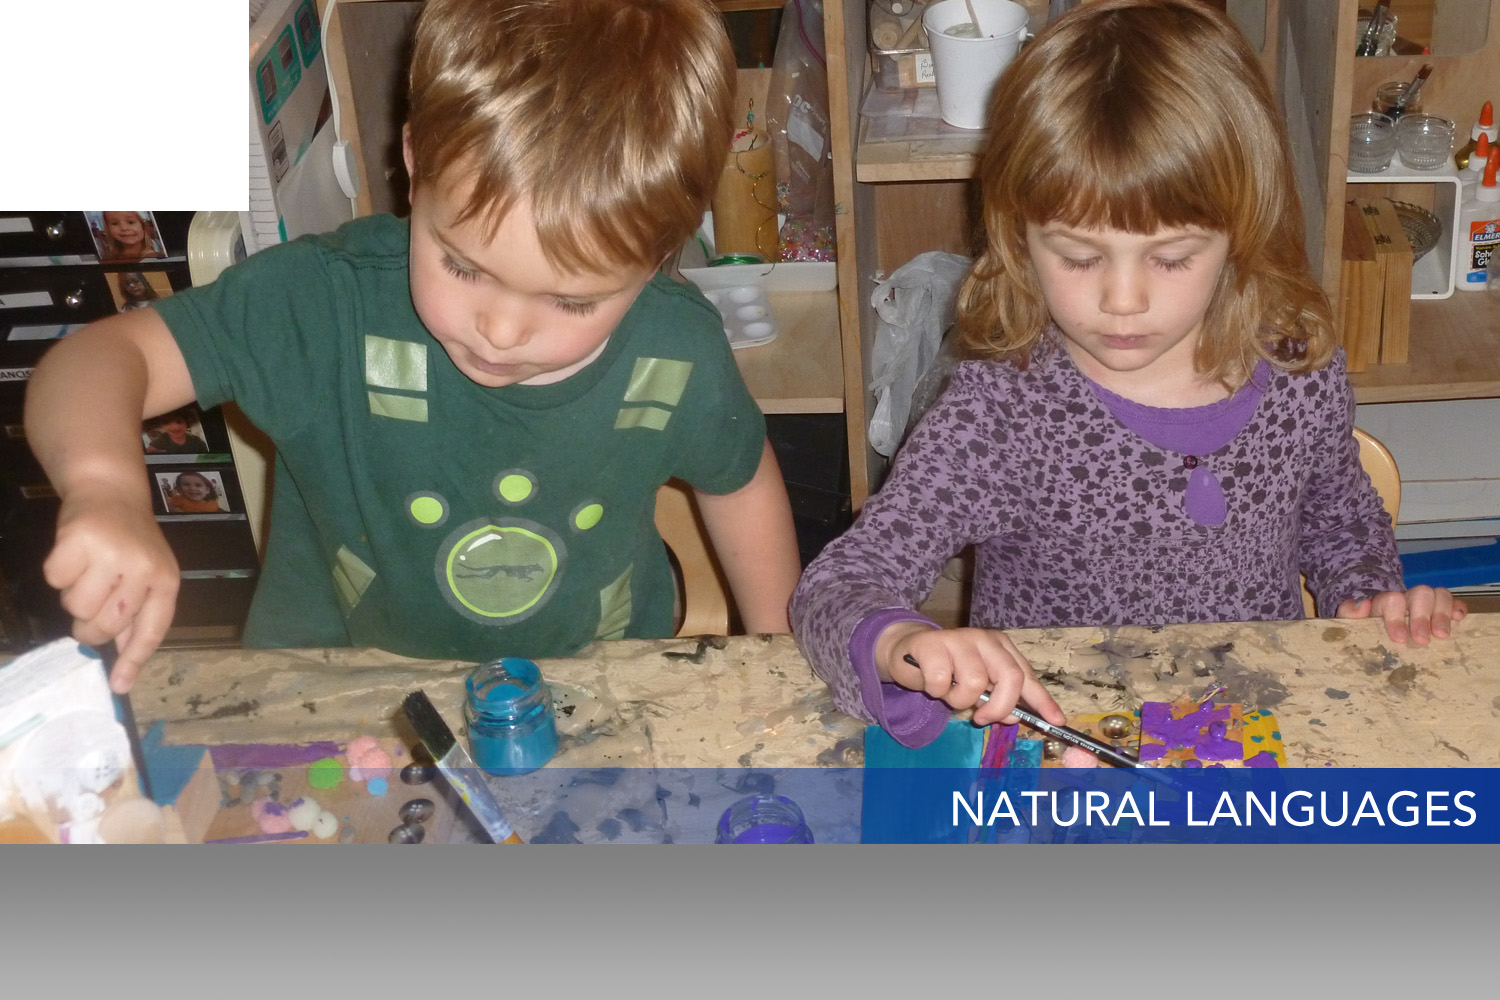  Children have the right to use many materials in order to discover and communicate what they know, understand and question. In this way, they make their thinking visible through their many natural "languages." A studio teacher works closely with chi